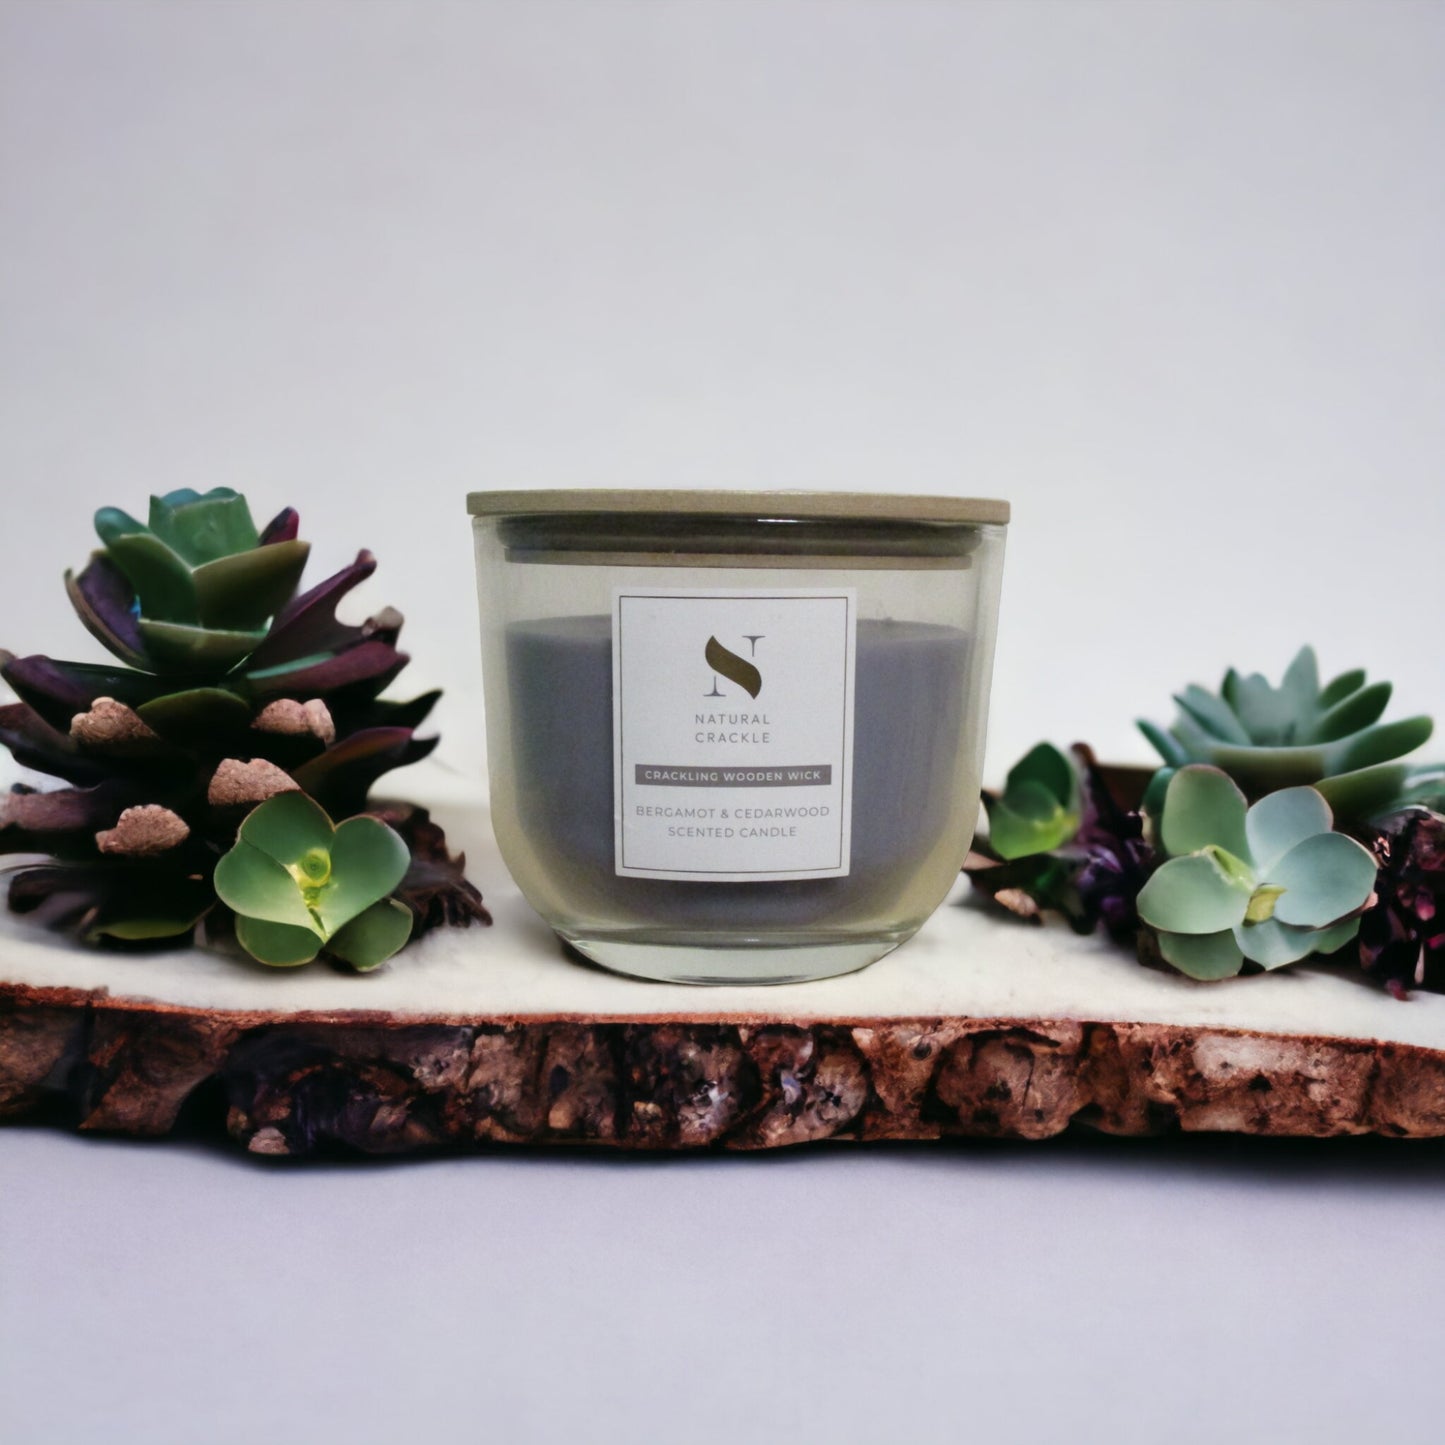 Natural Crackle - Wood Crackling Wick Candles